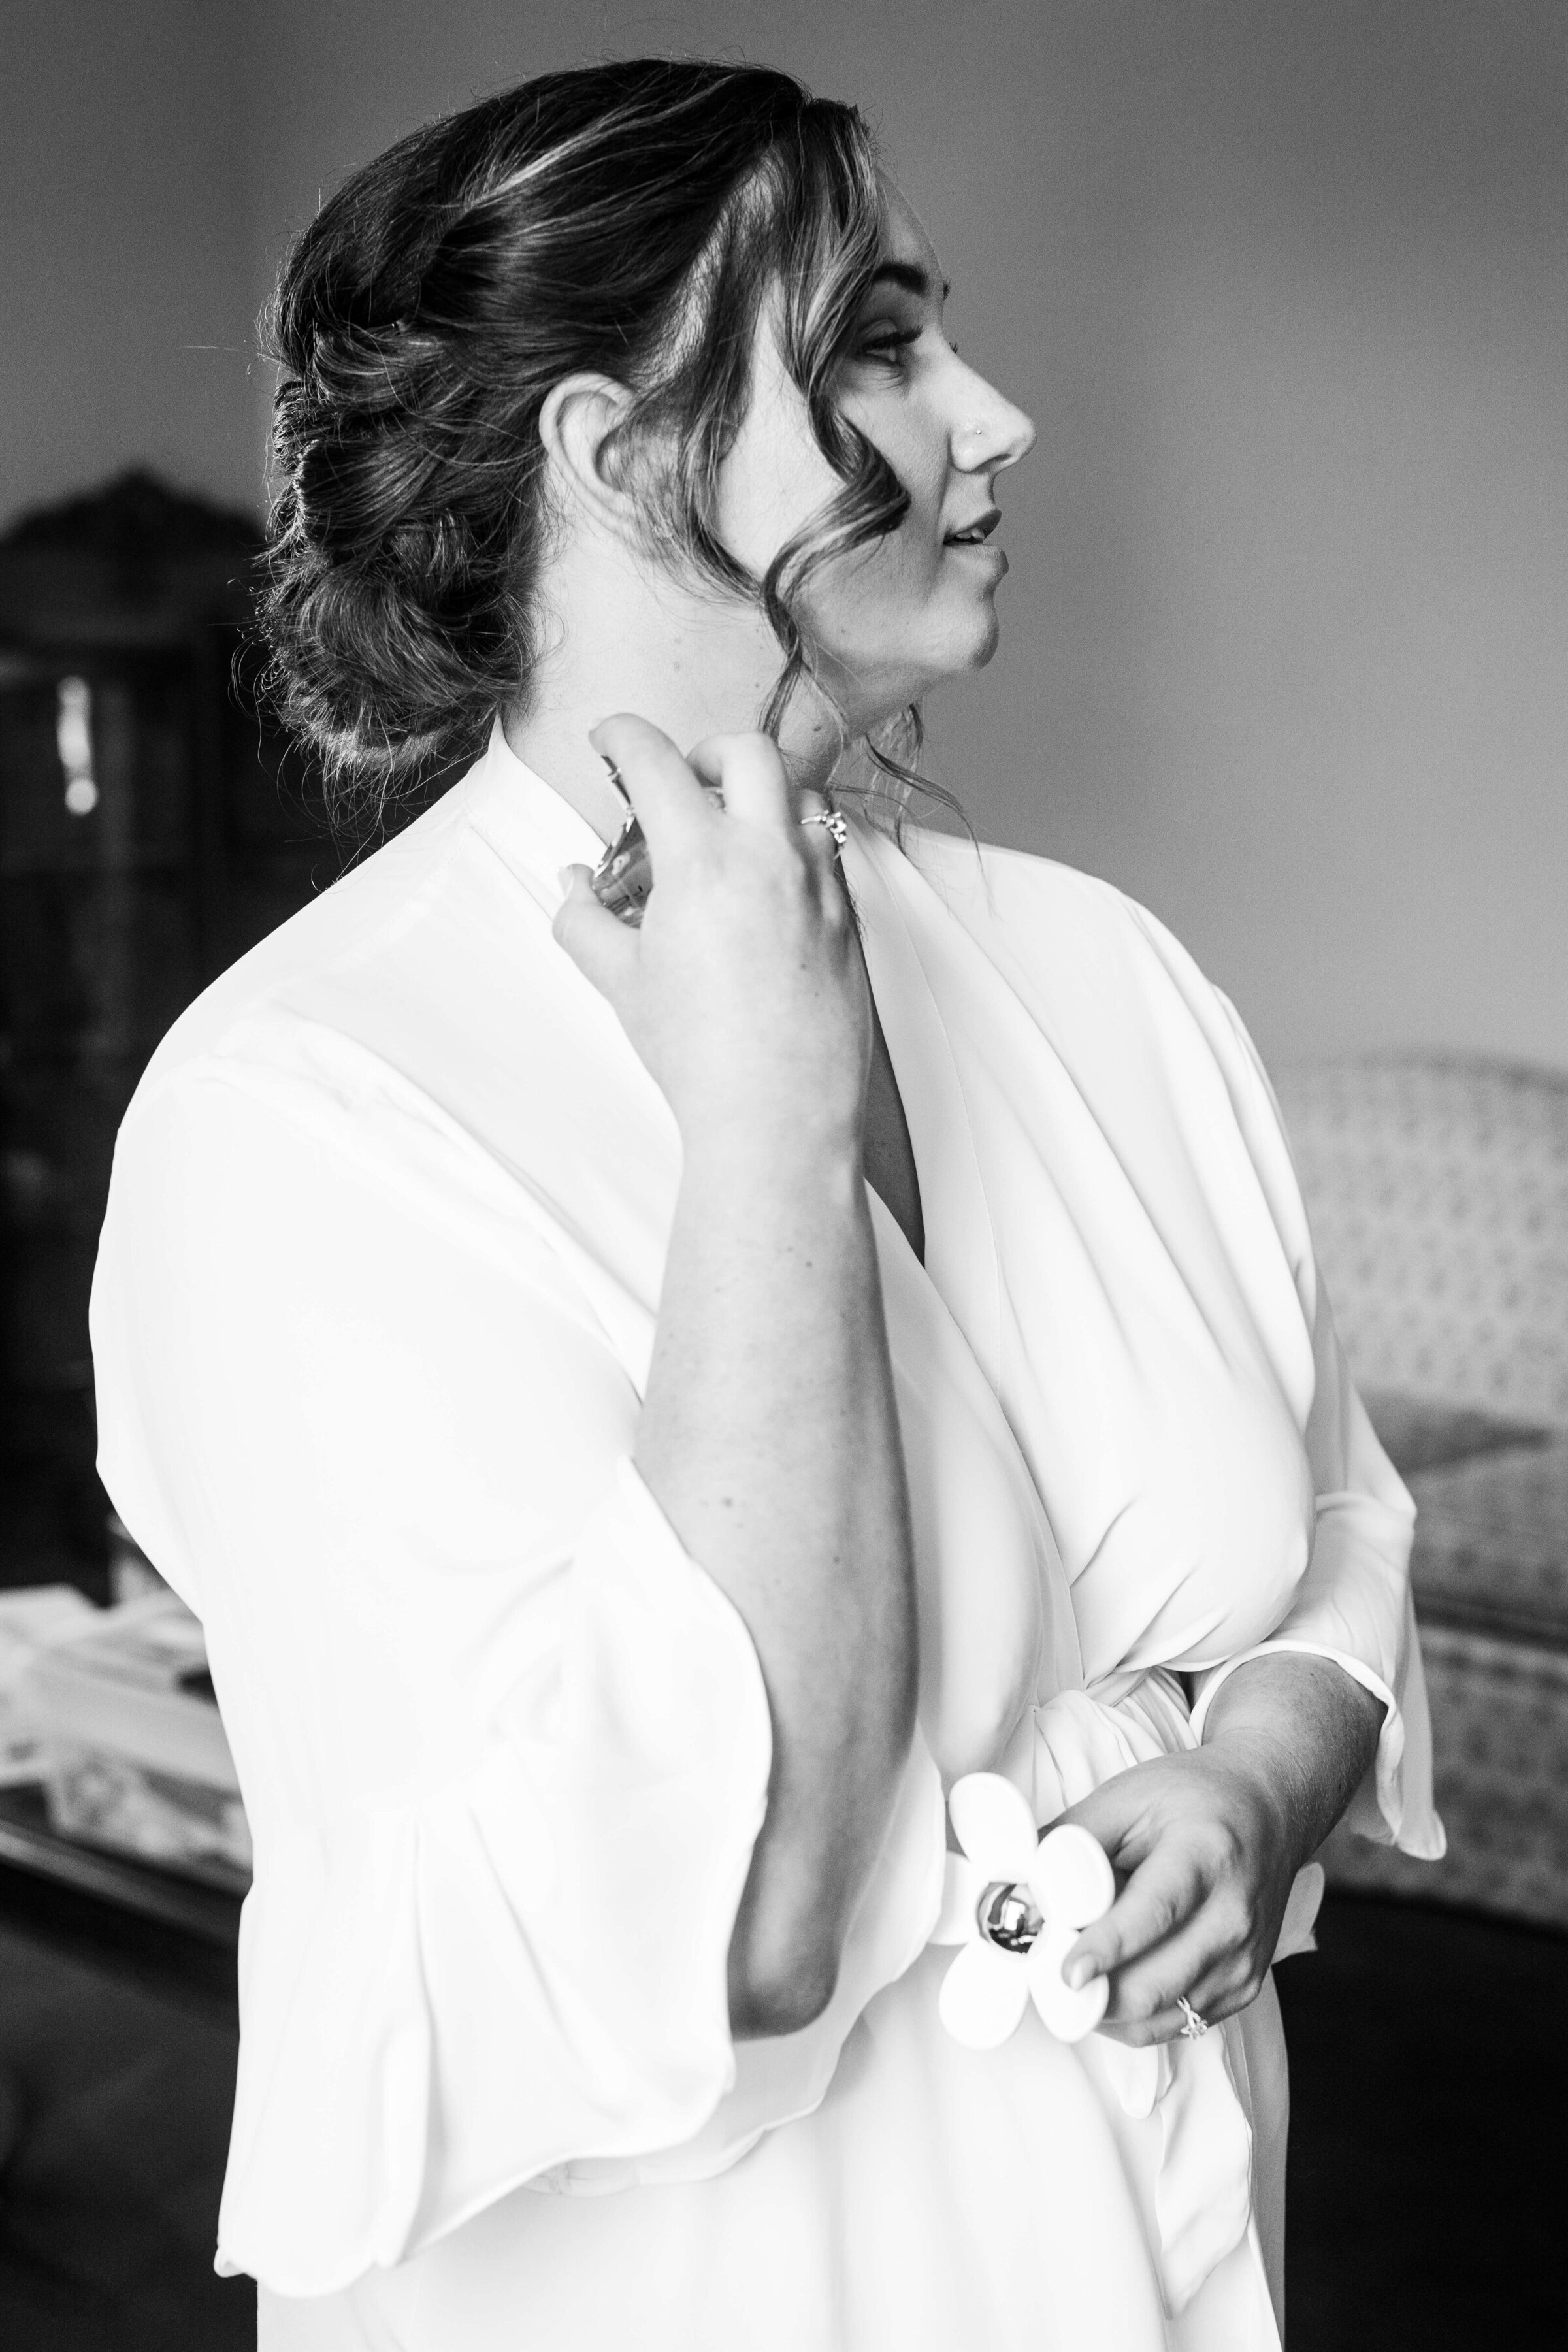 An up close black and white photo of a bride putting on perfume in her white robe